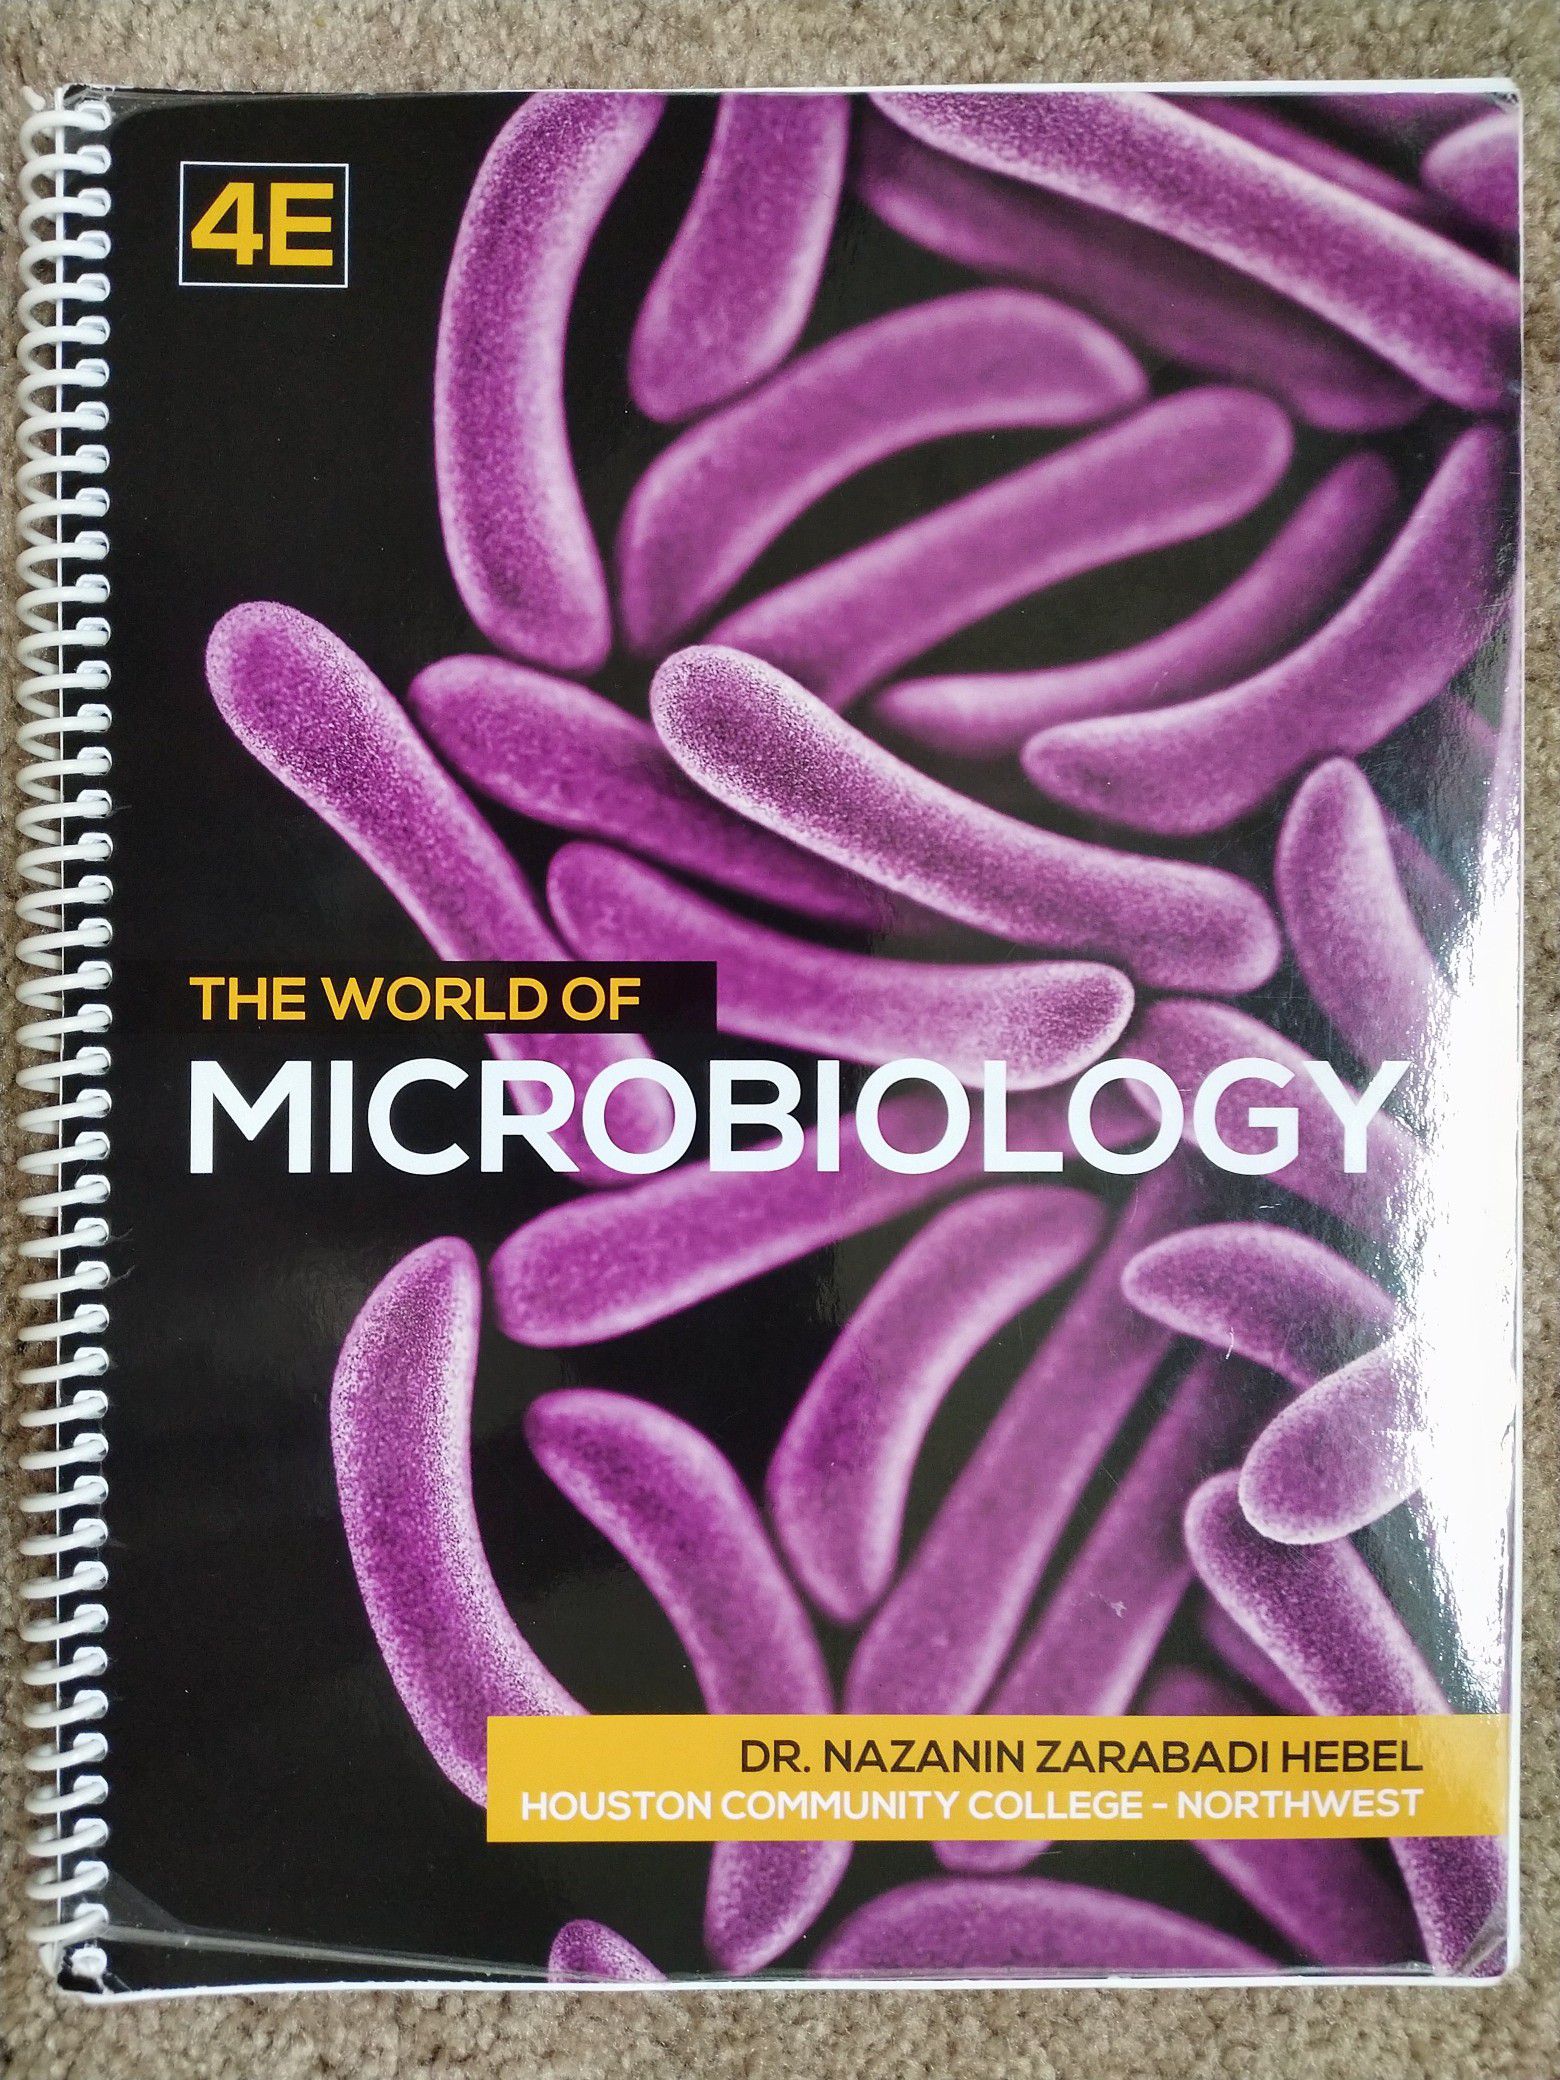 OfferUp　Hebel　edition　Sale　Microbiology,　by　TX　Dr.　World　4th　Katy,　The　in　of　for